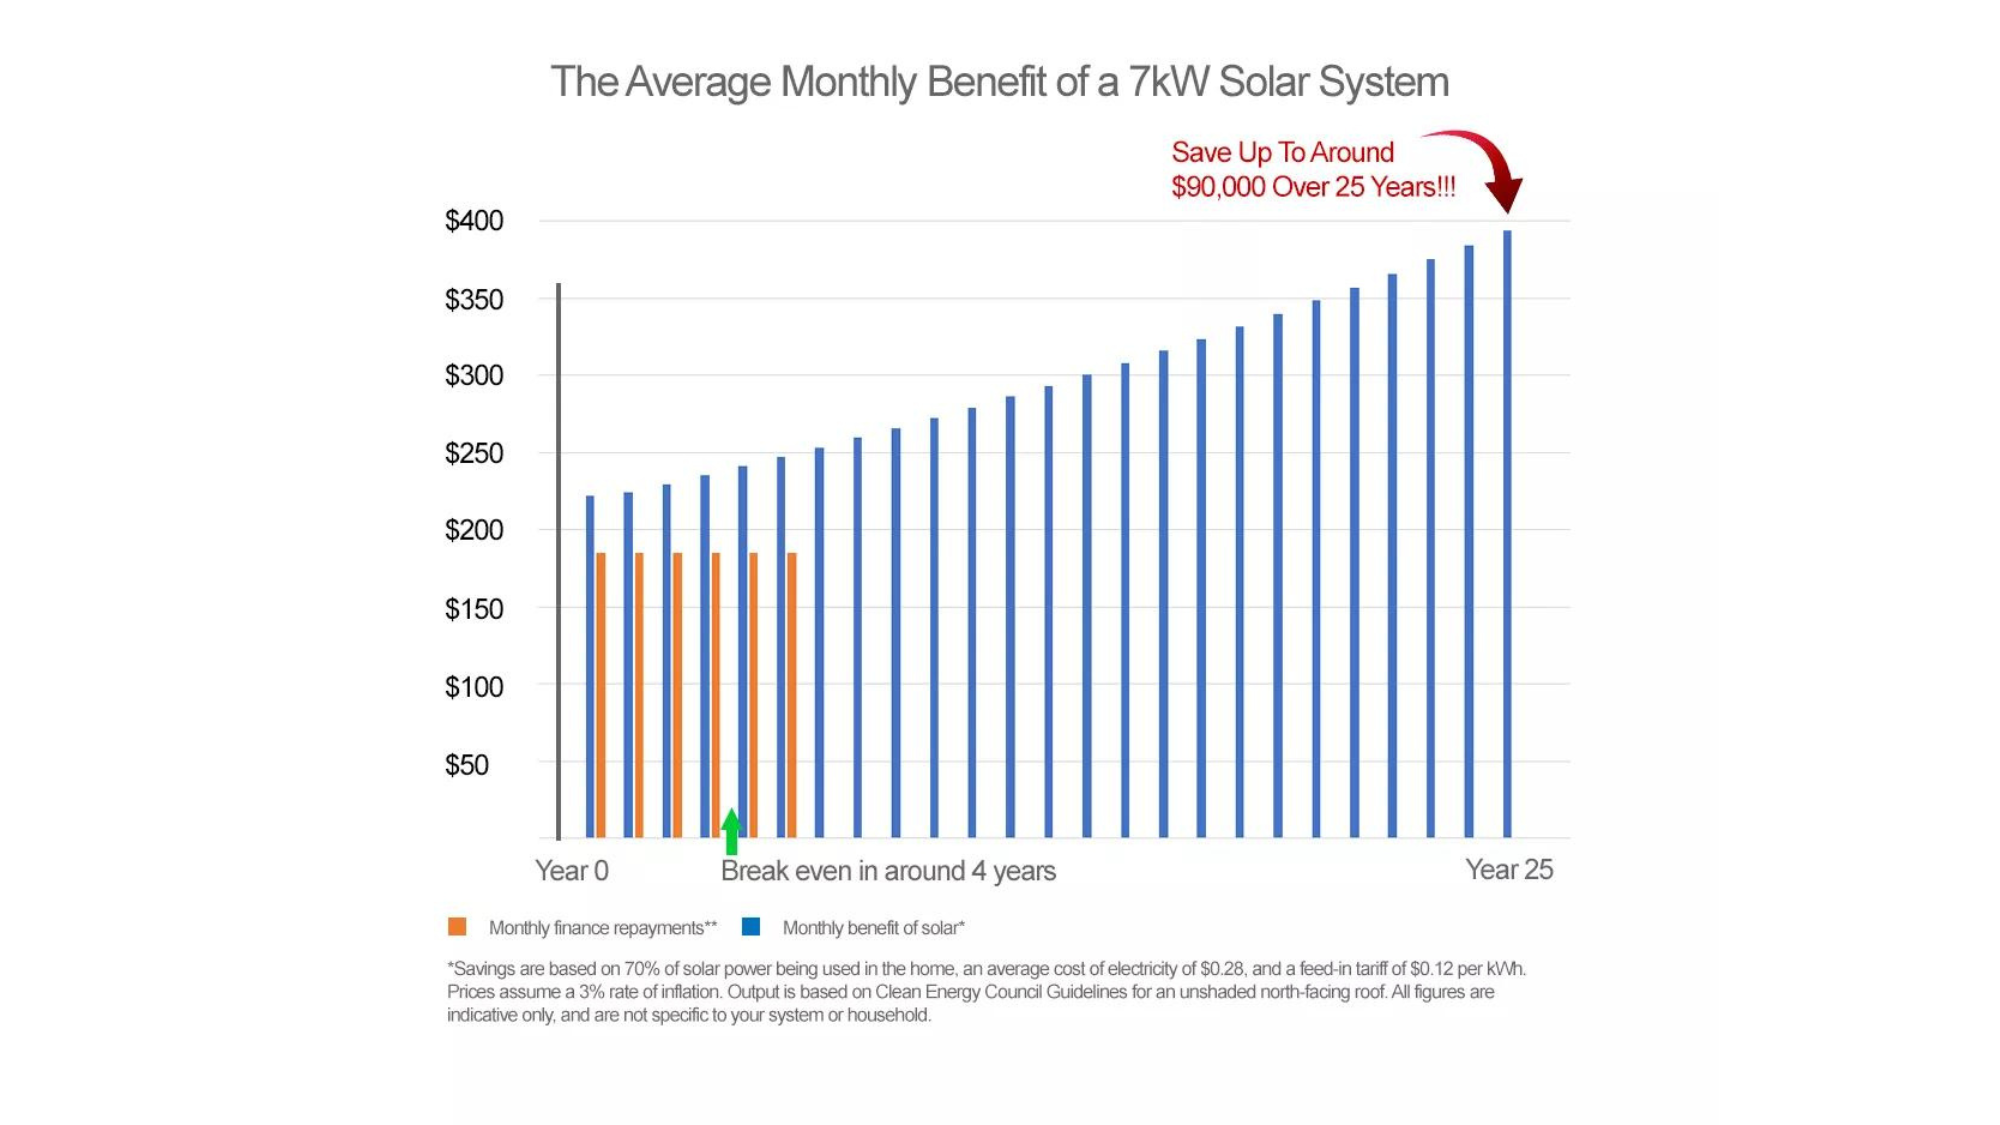 Total Savings of a 7kW Solar System